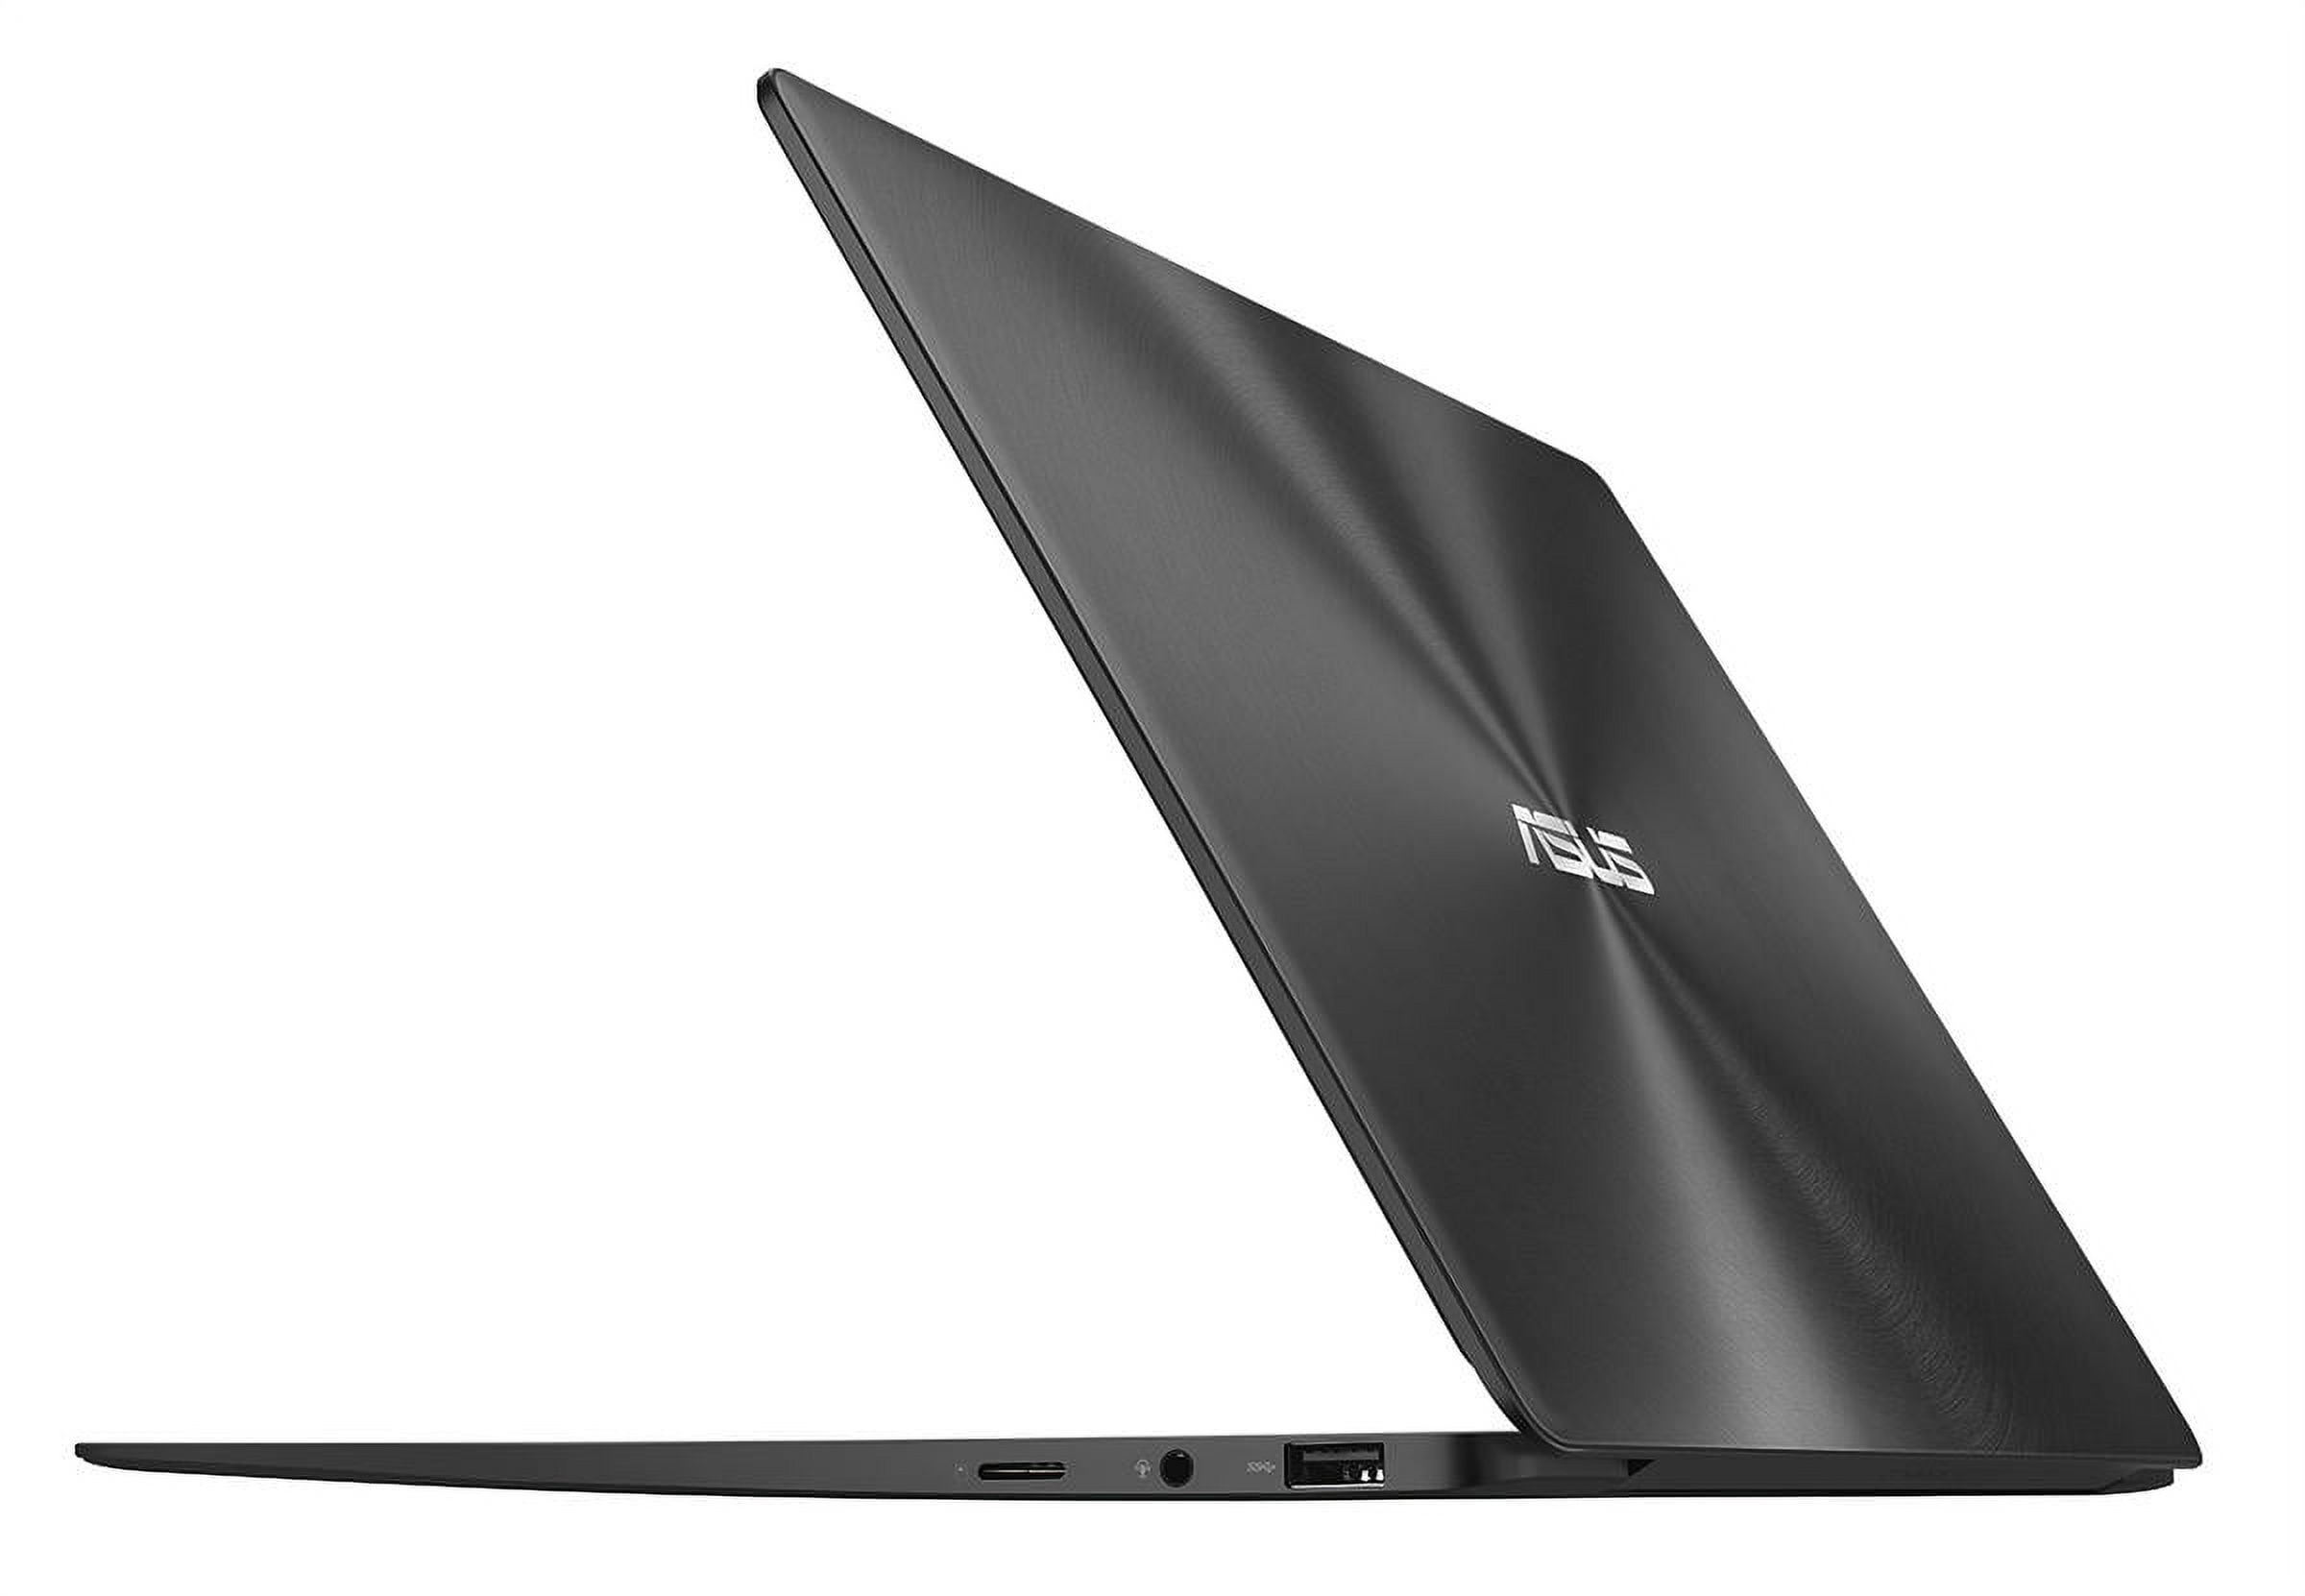 ASUS Zenbook 13, 13.3 Full HD WideView Touch, Intel Core i5-8265U